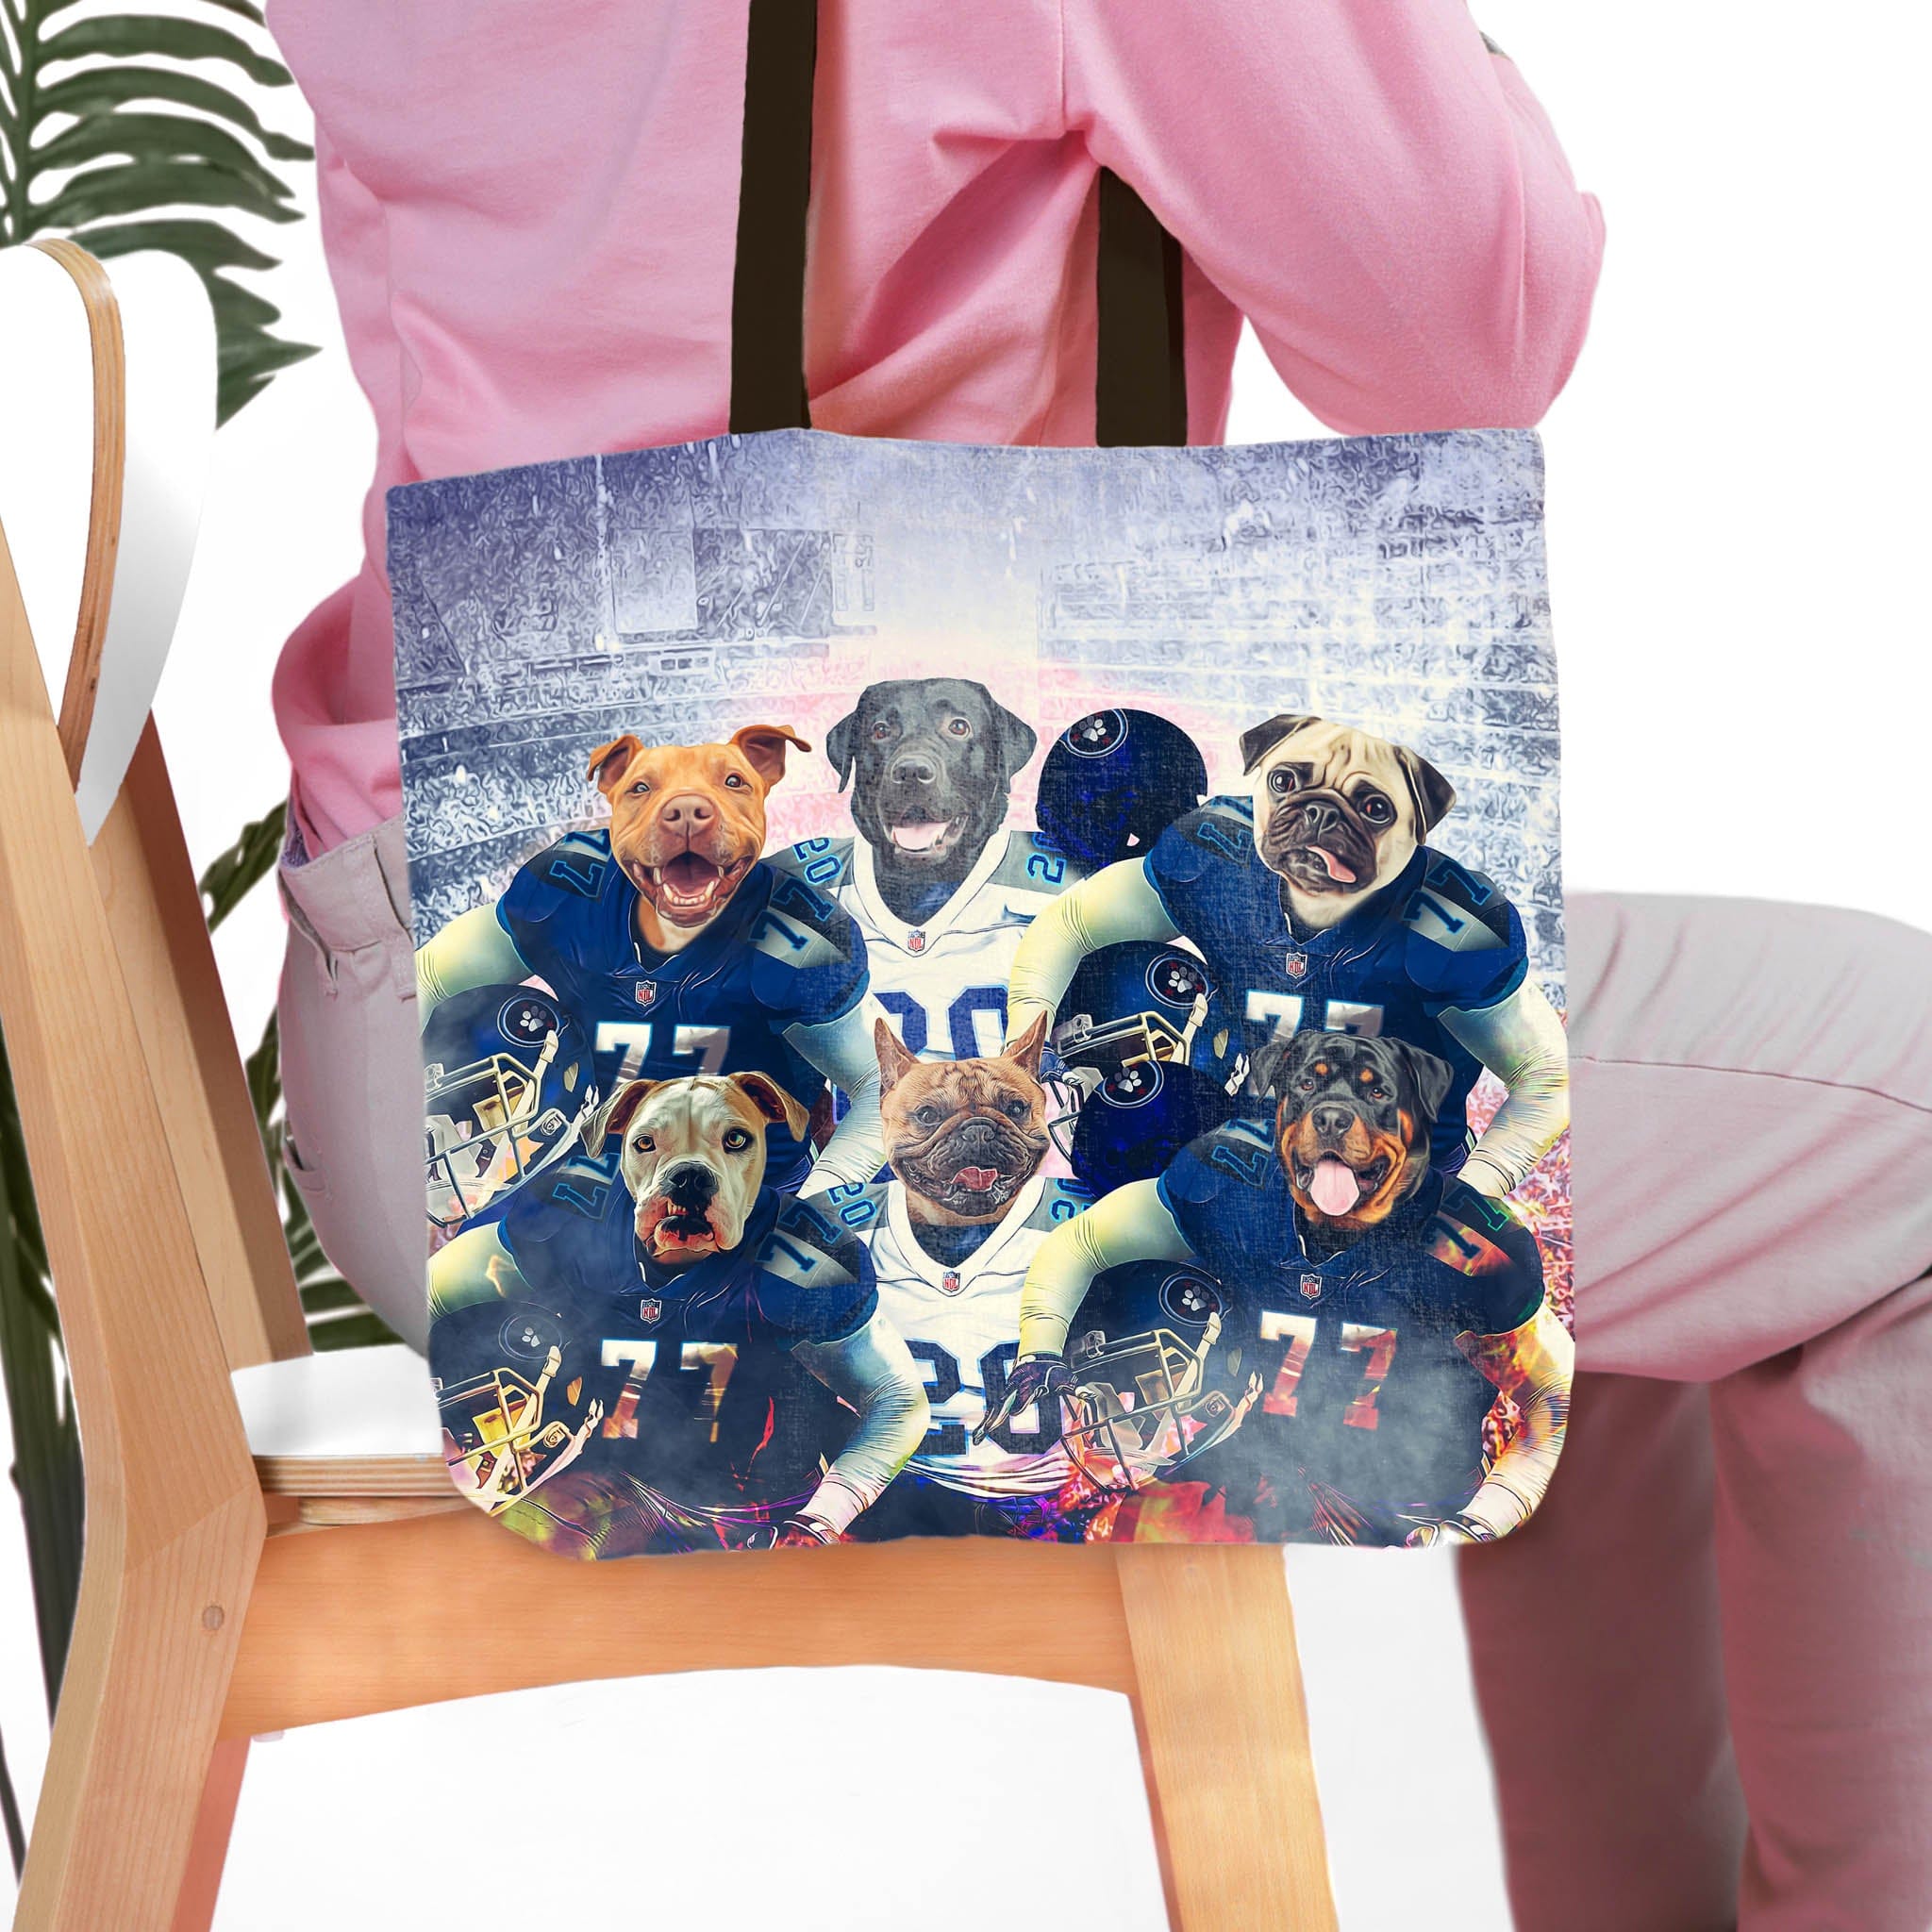 &#39;Tennessee Doggos&#39; Personalized 6 Pet Tote Bag